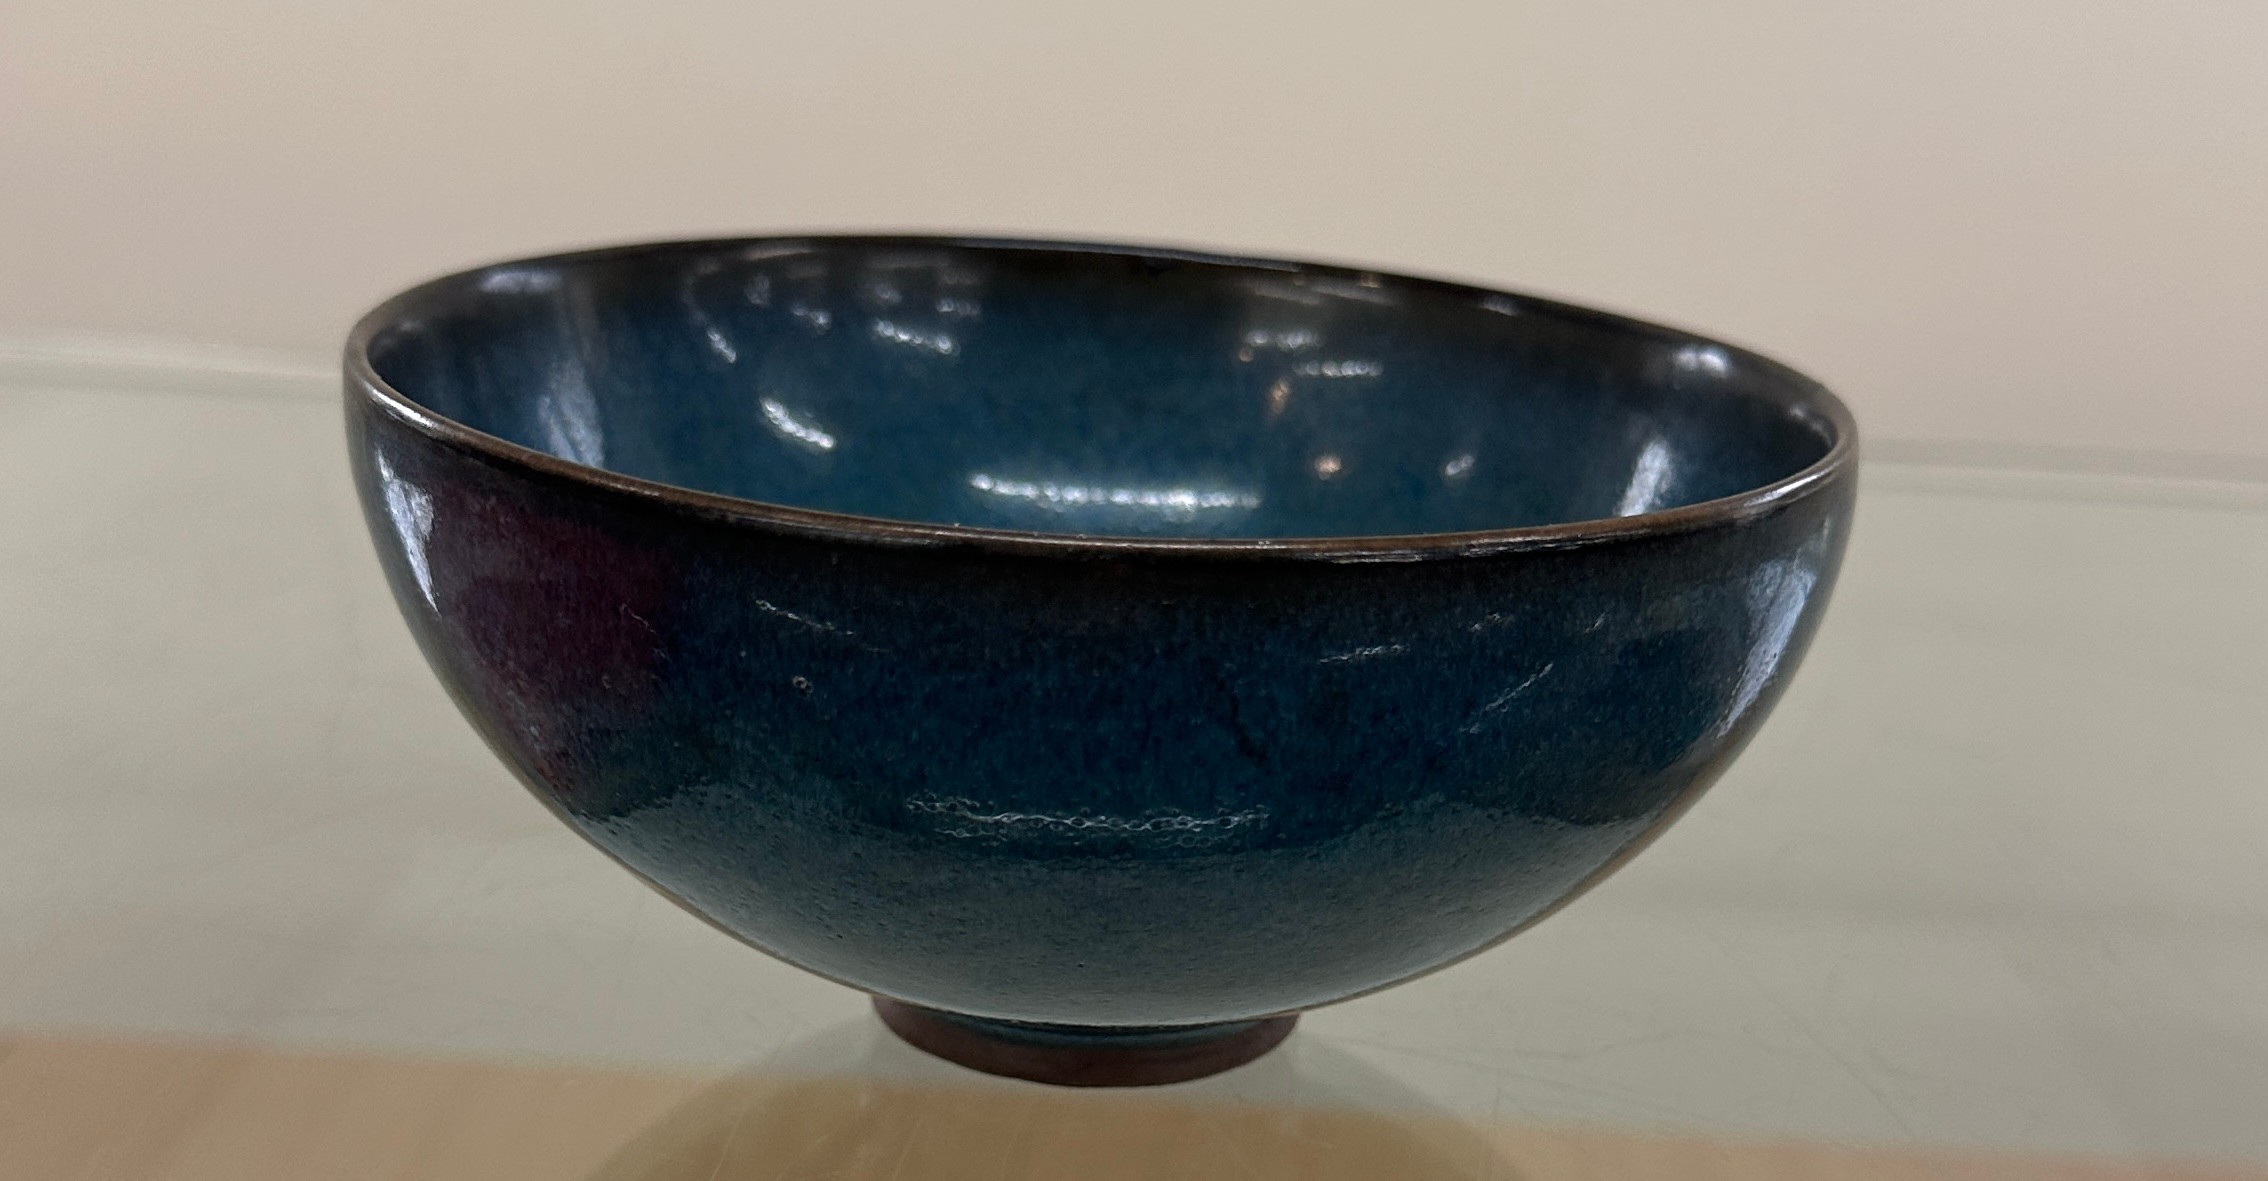 Oriental glazed bowl, no marks to base - measures approx 2.5 inches tall by 5 inches diameter - Image 3 of 4